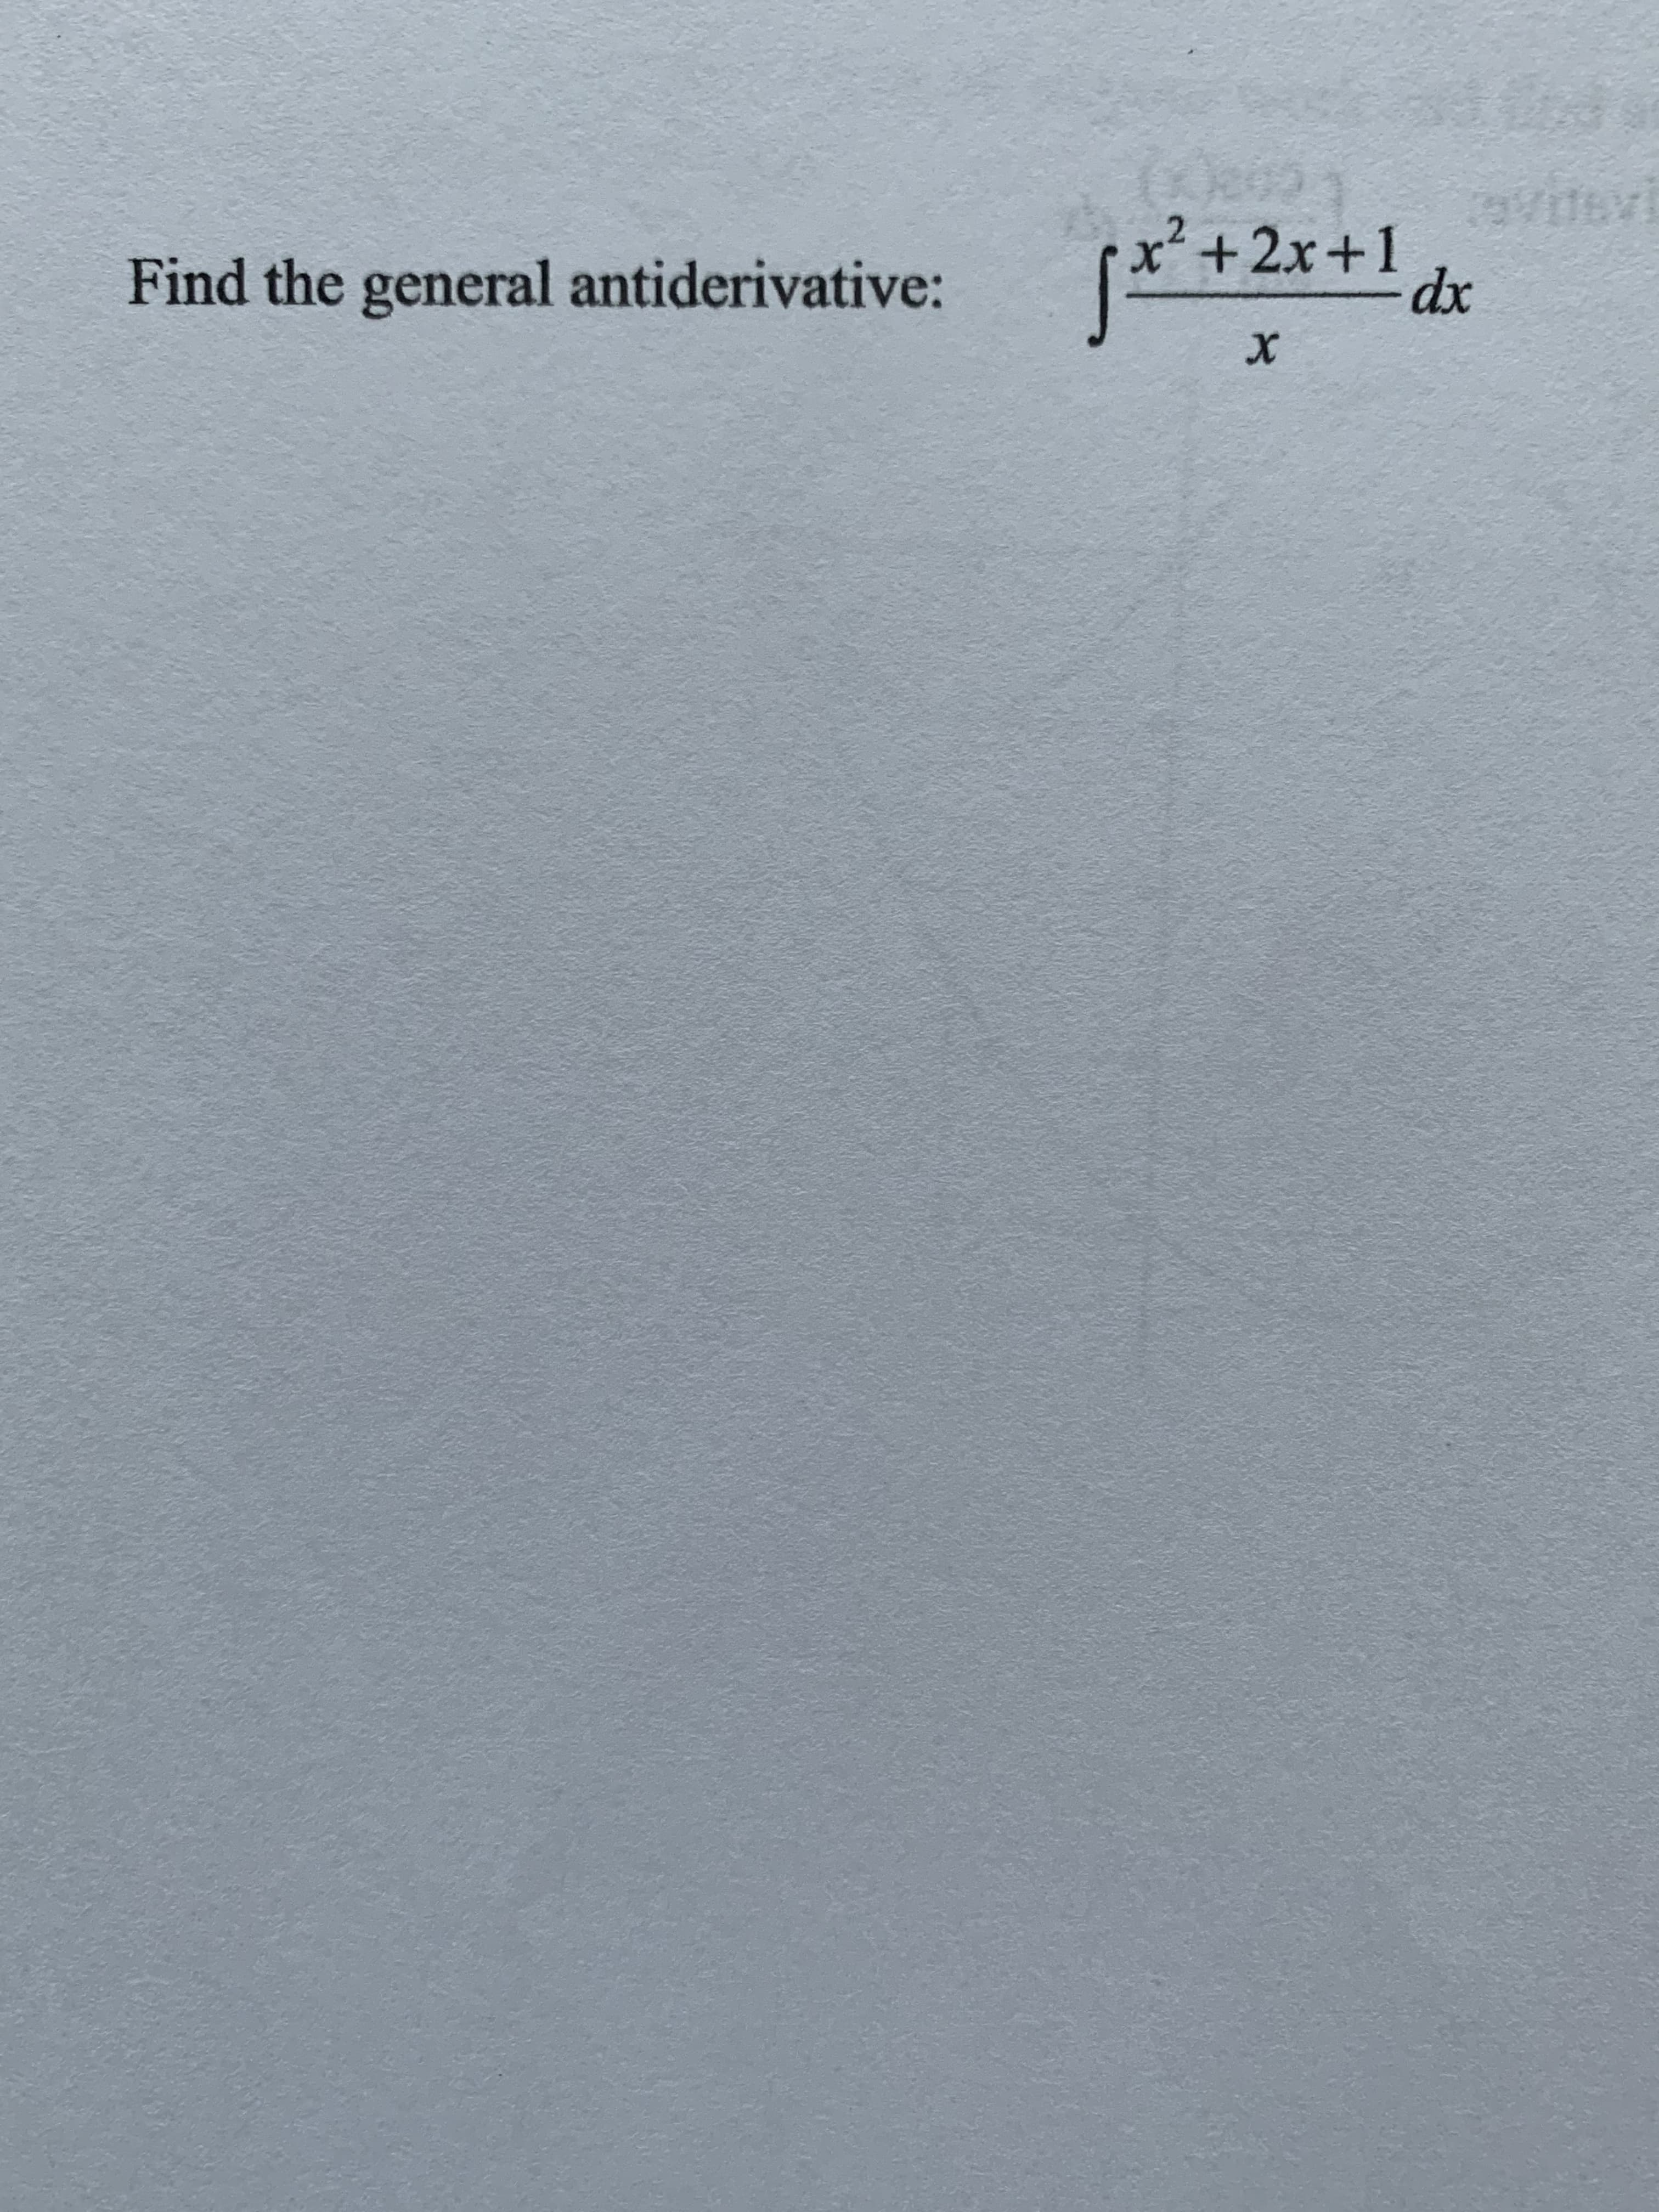 x² +2x+1
Find the general antiderivative:
